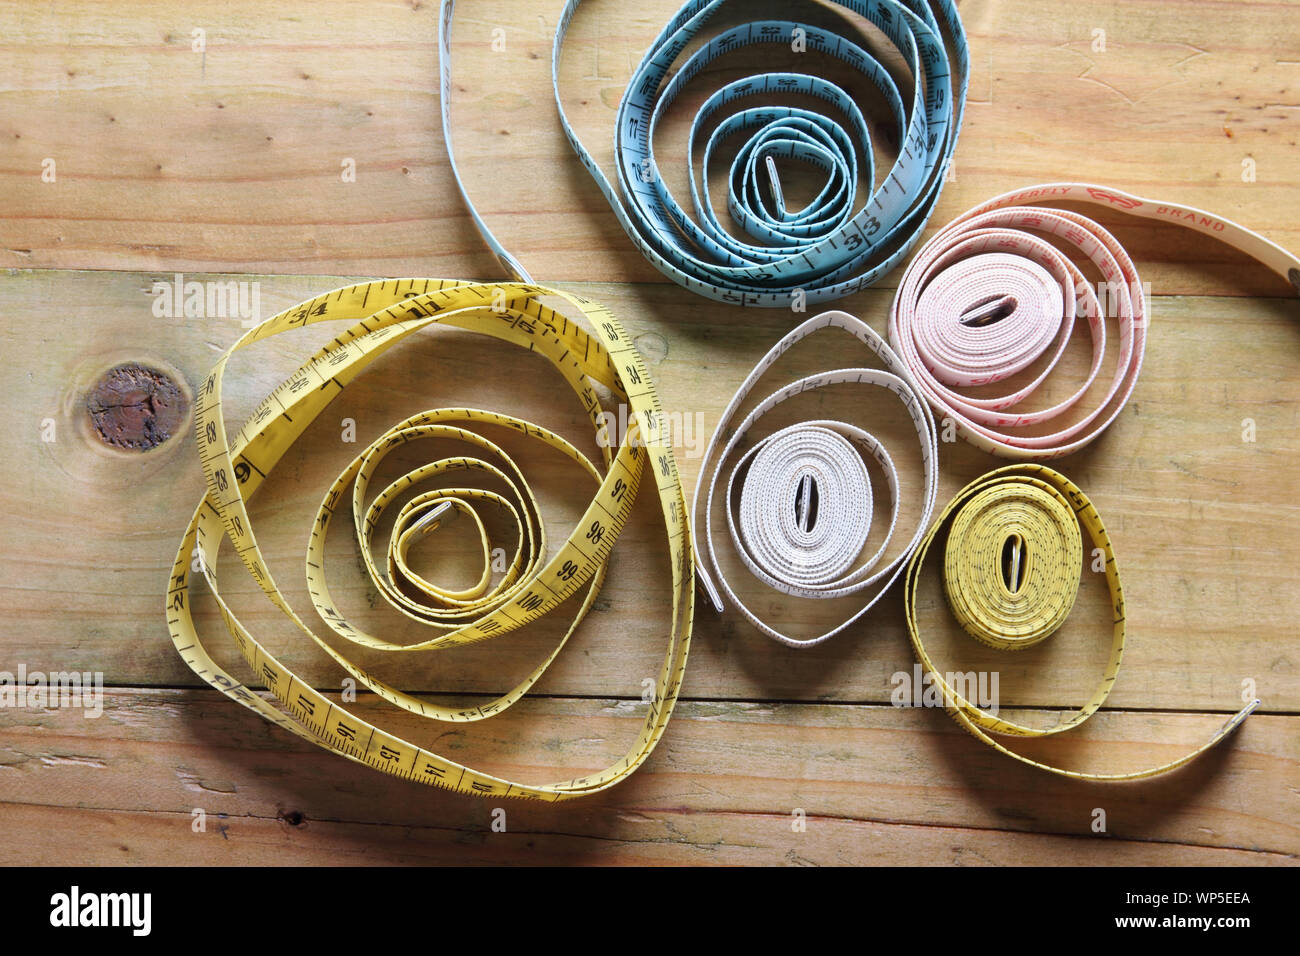 Tape Measures on Wooden Background Stock Photo